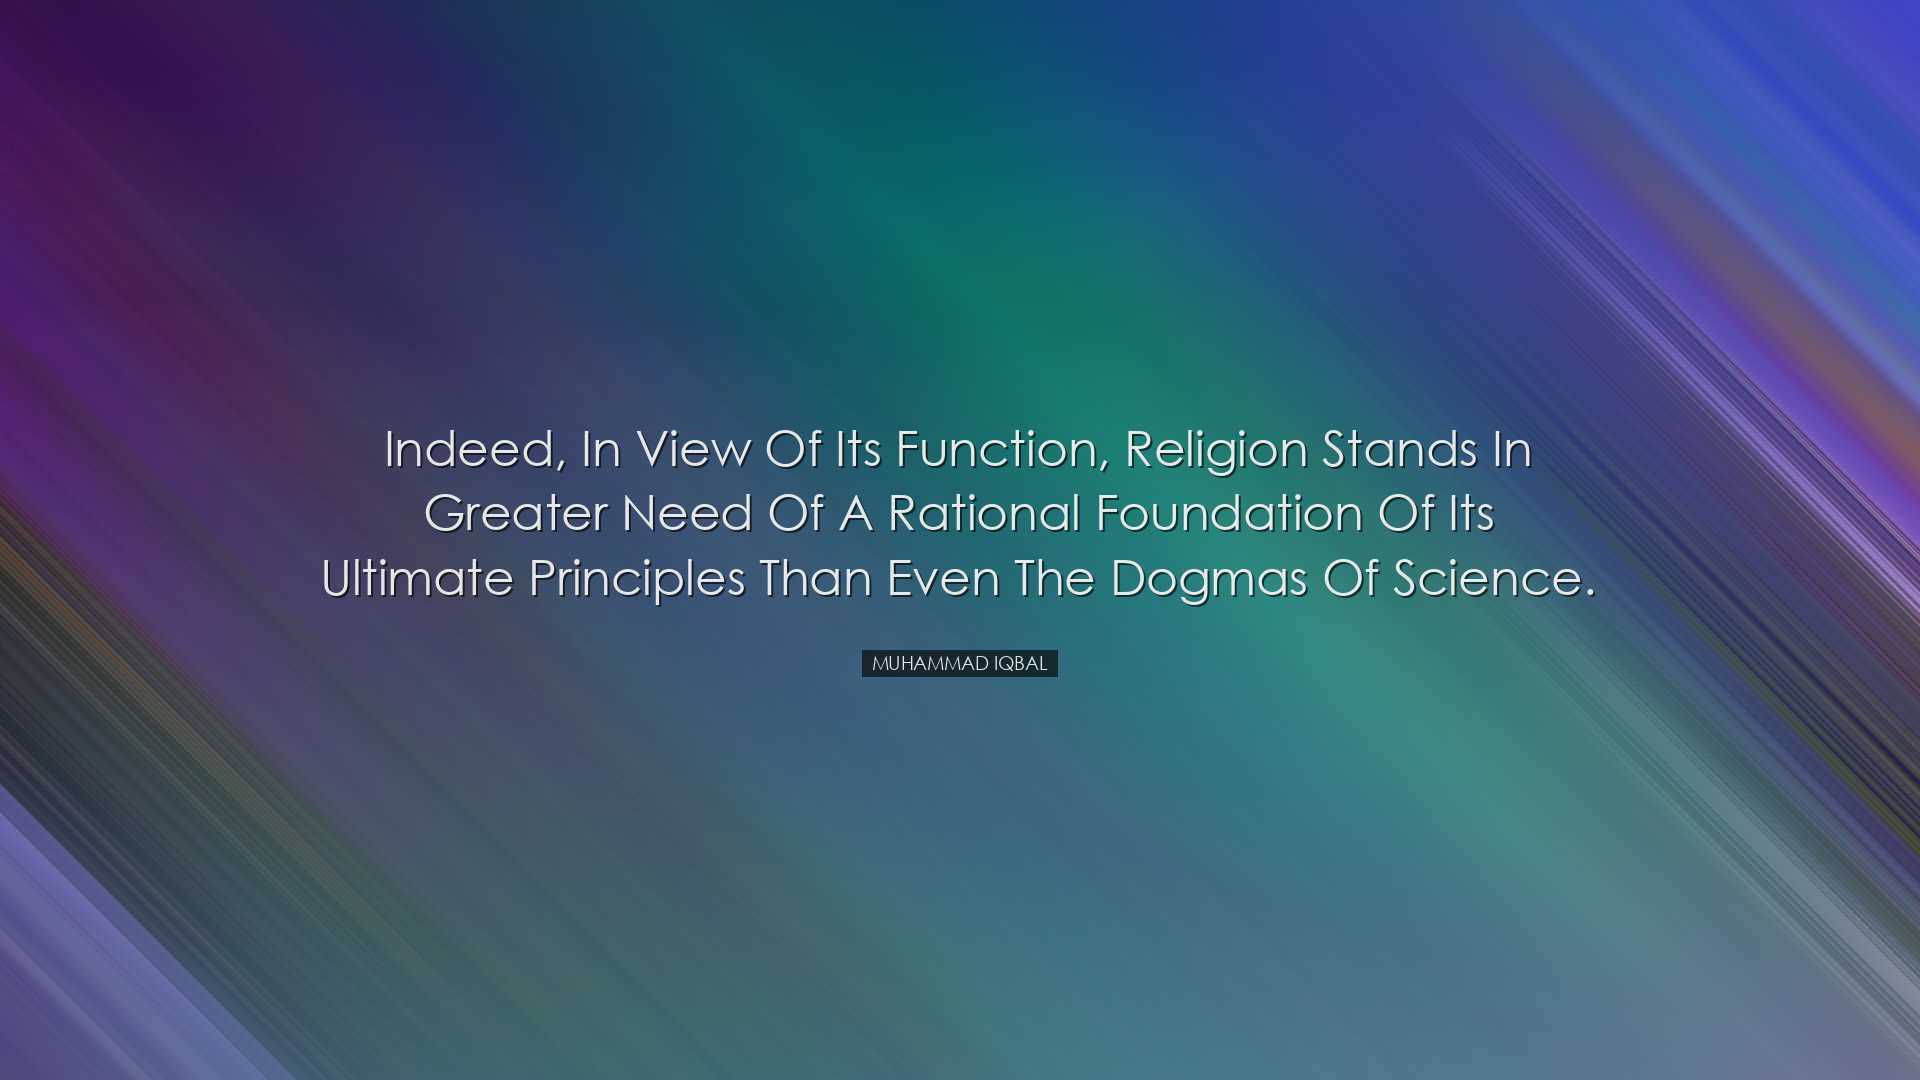 Indeed, in view of its function, religion stands in greater need o